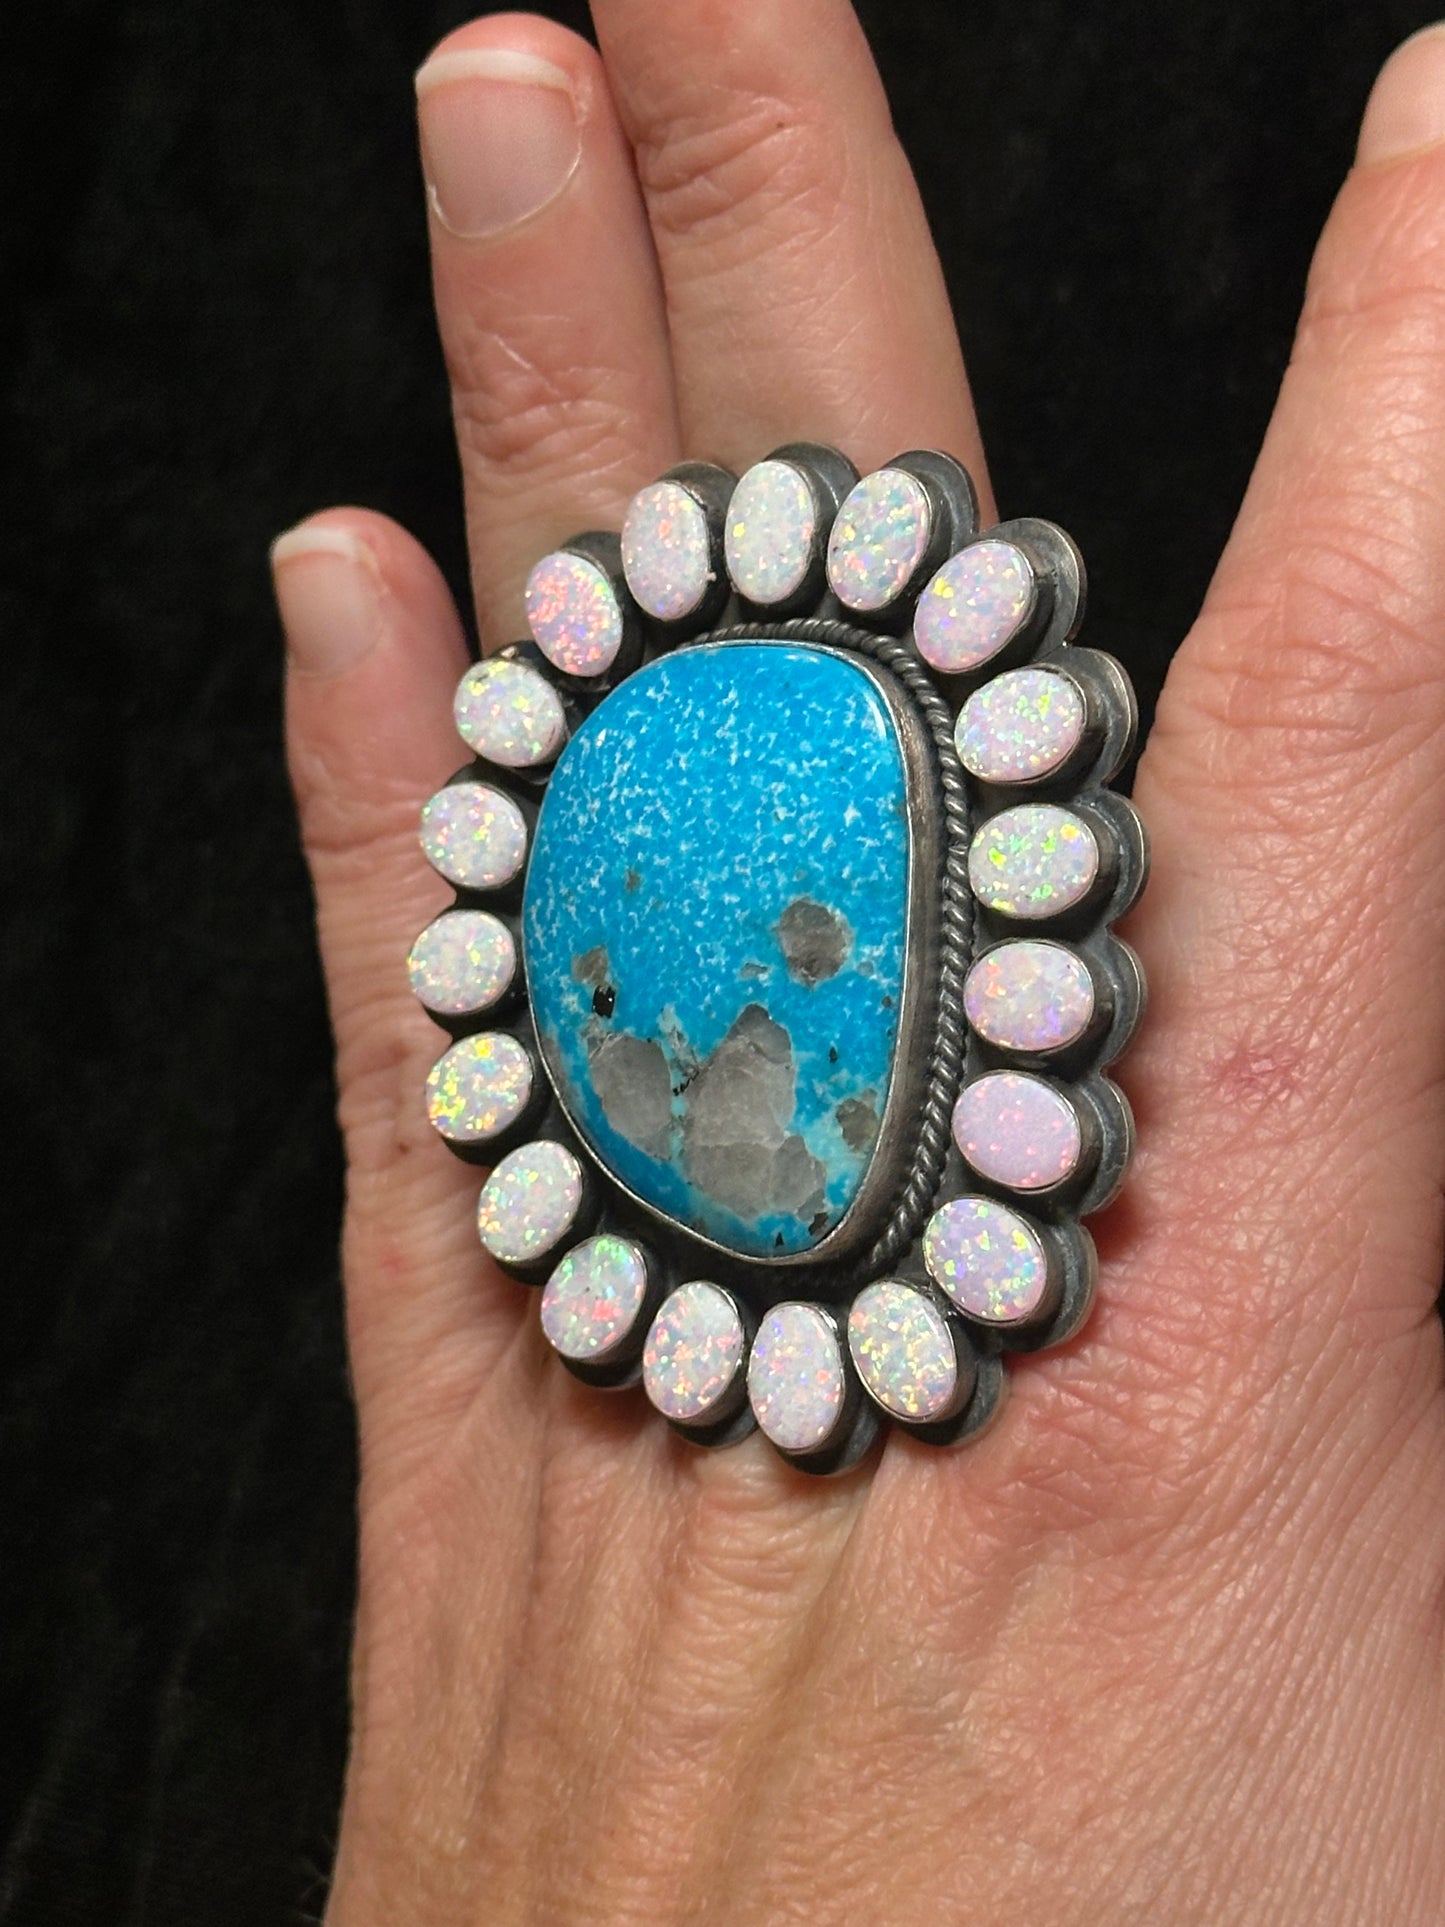 12.0 Kingman Turquoise Ring with Opal Stones by Zia